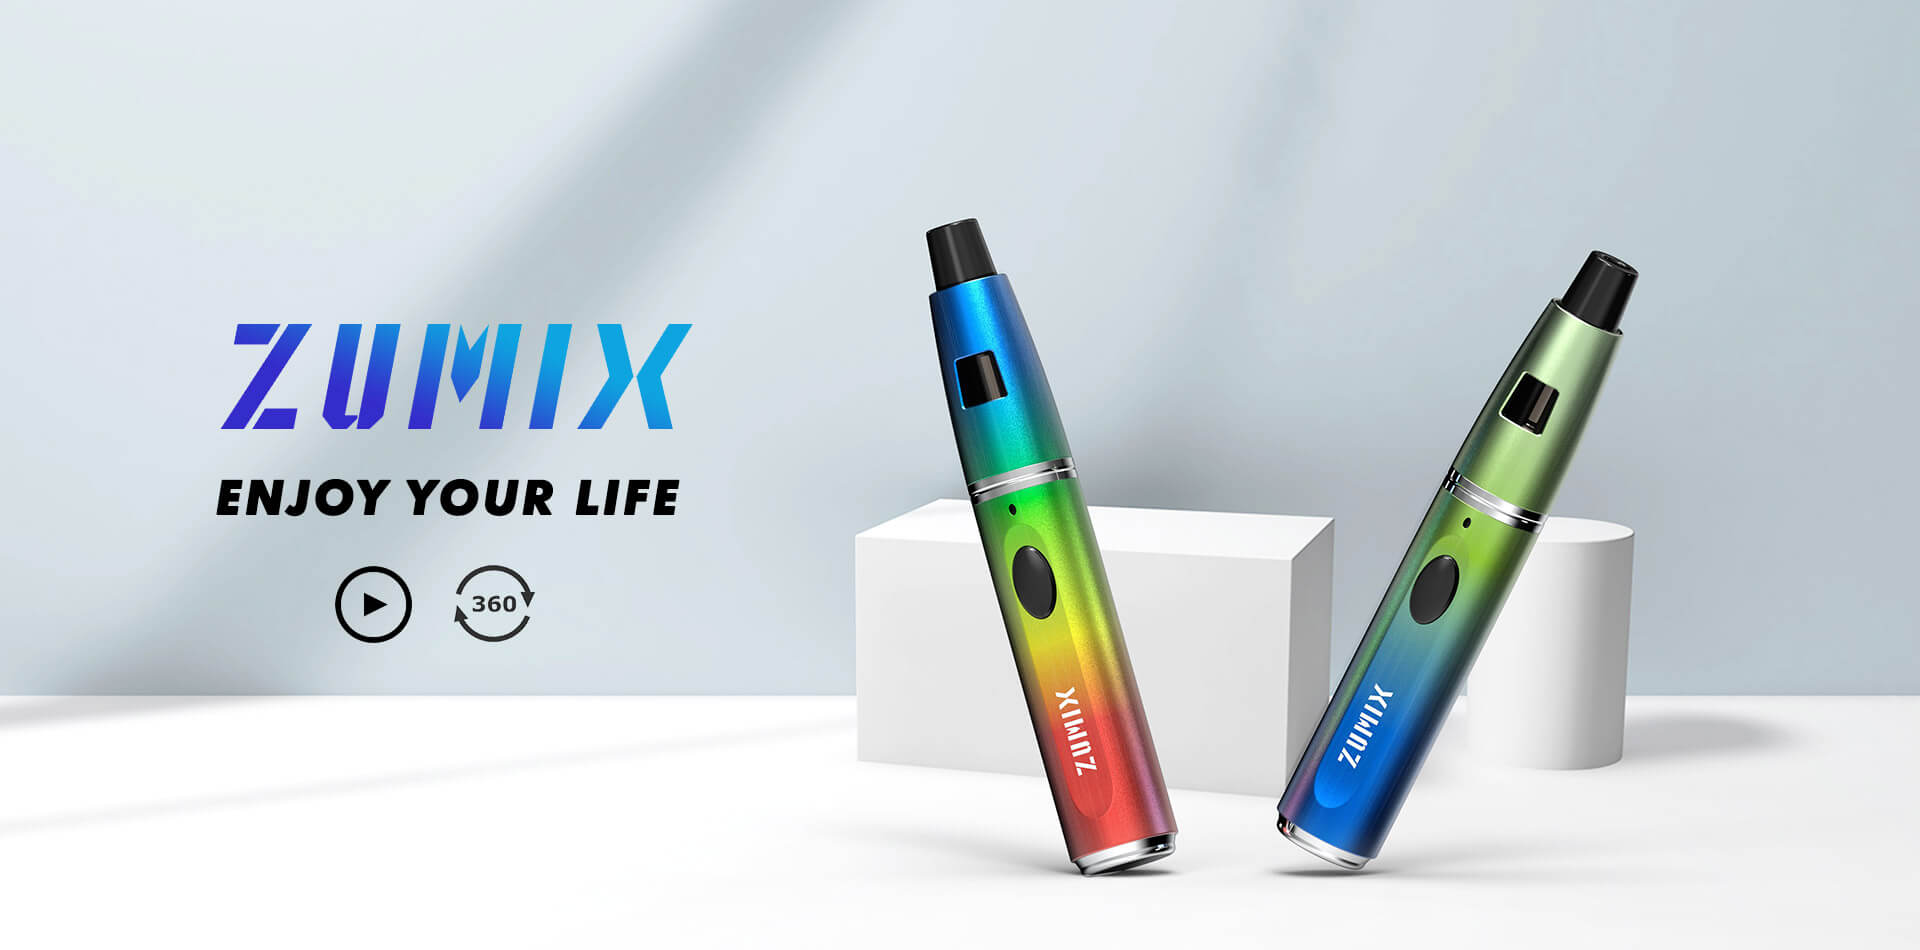 zumix - best pod device coating process - the brushed finish and shot-blast, which are rarely seen on pod devices, are applied to each color on Zumix accordingly. the moment you hold it, you'll crush on it.-10